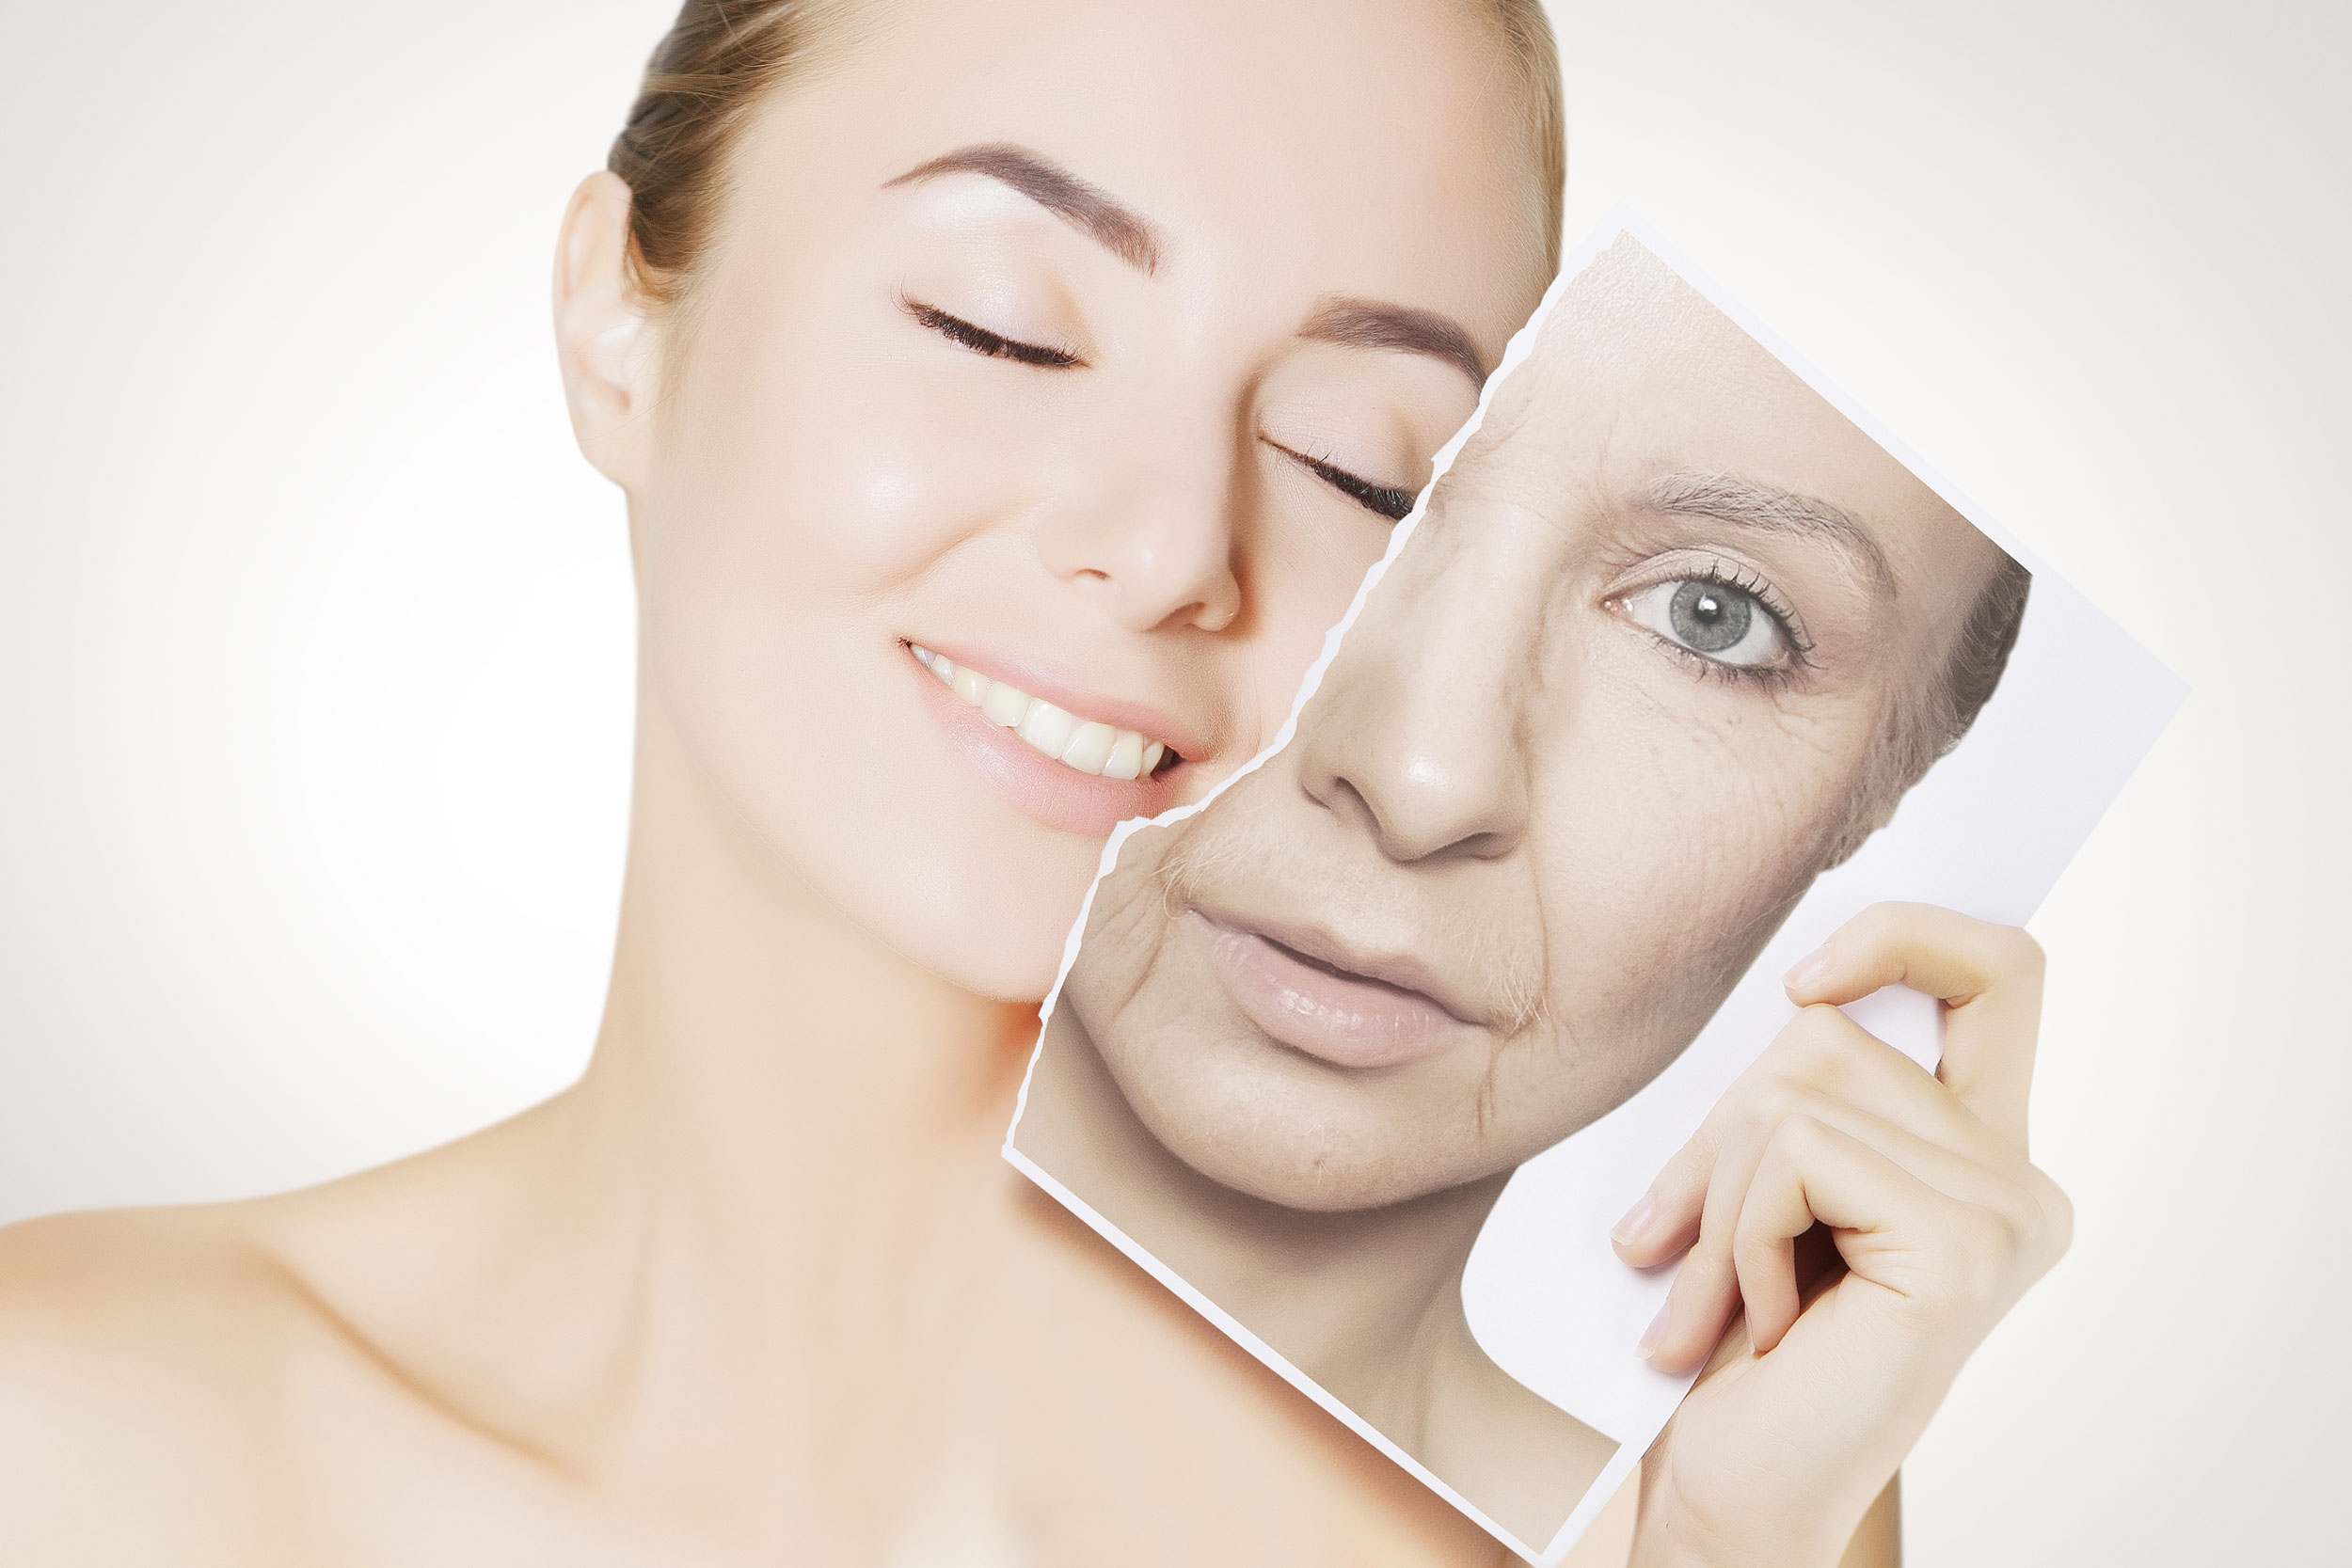 How age is important for the cosmetic surgery